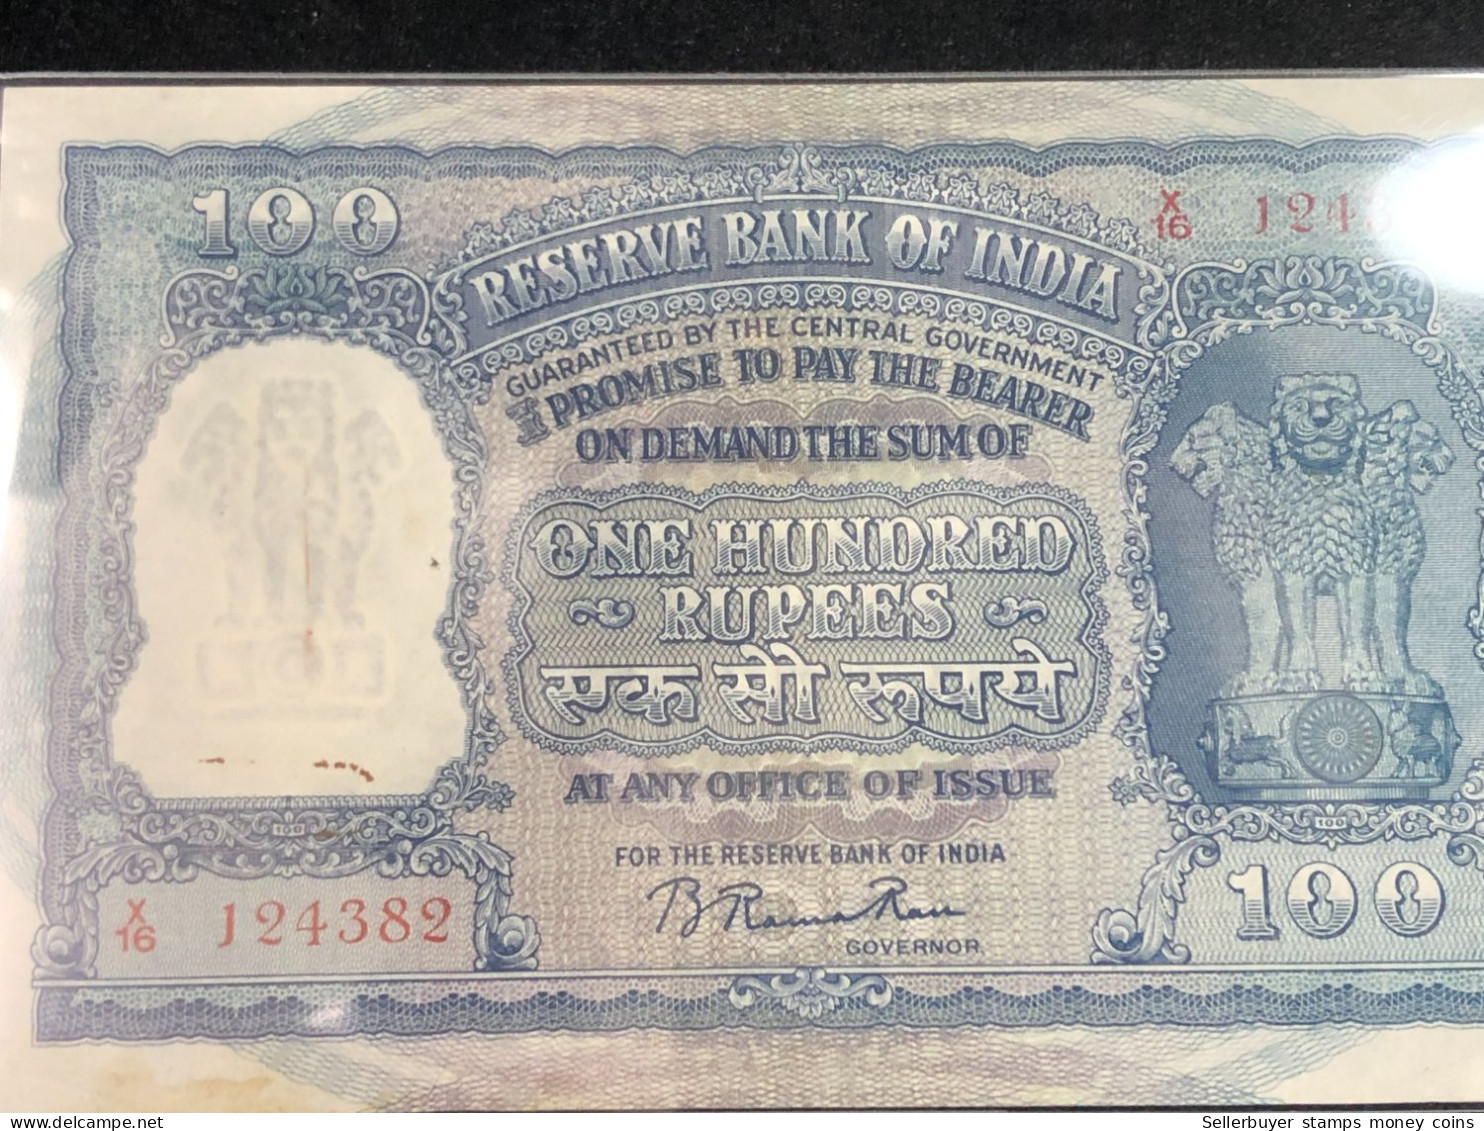 INDIA 100 RUPEES P-43  1957 TIGER ELEPHANT DAM MONEY BILL Rhas Pinhole ARE BANK NOTE Red Numbers Above And Below 1 Pcs A - Indien